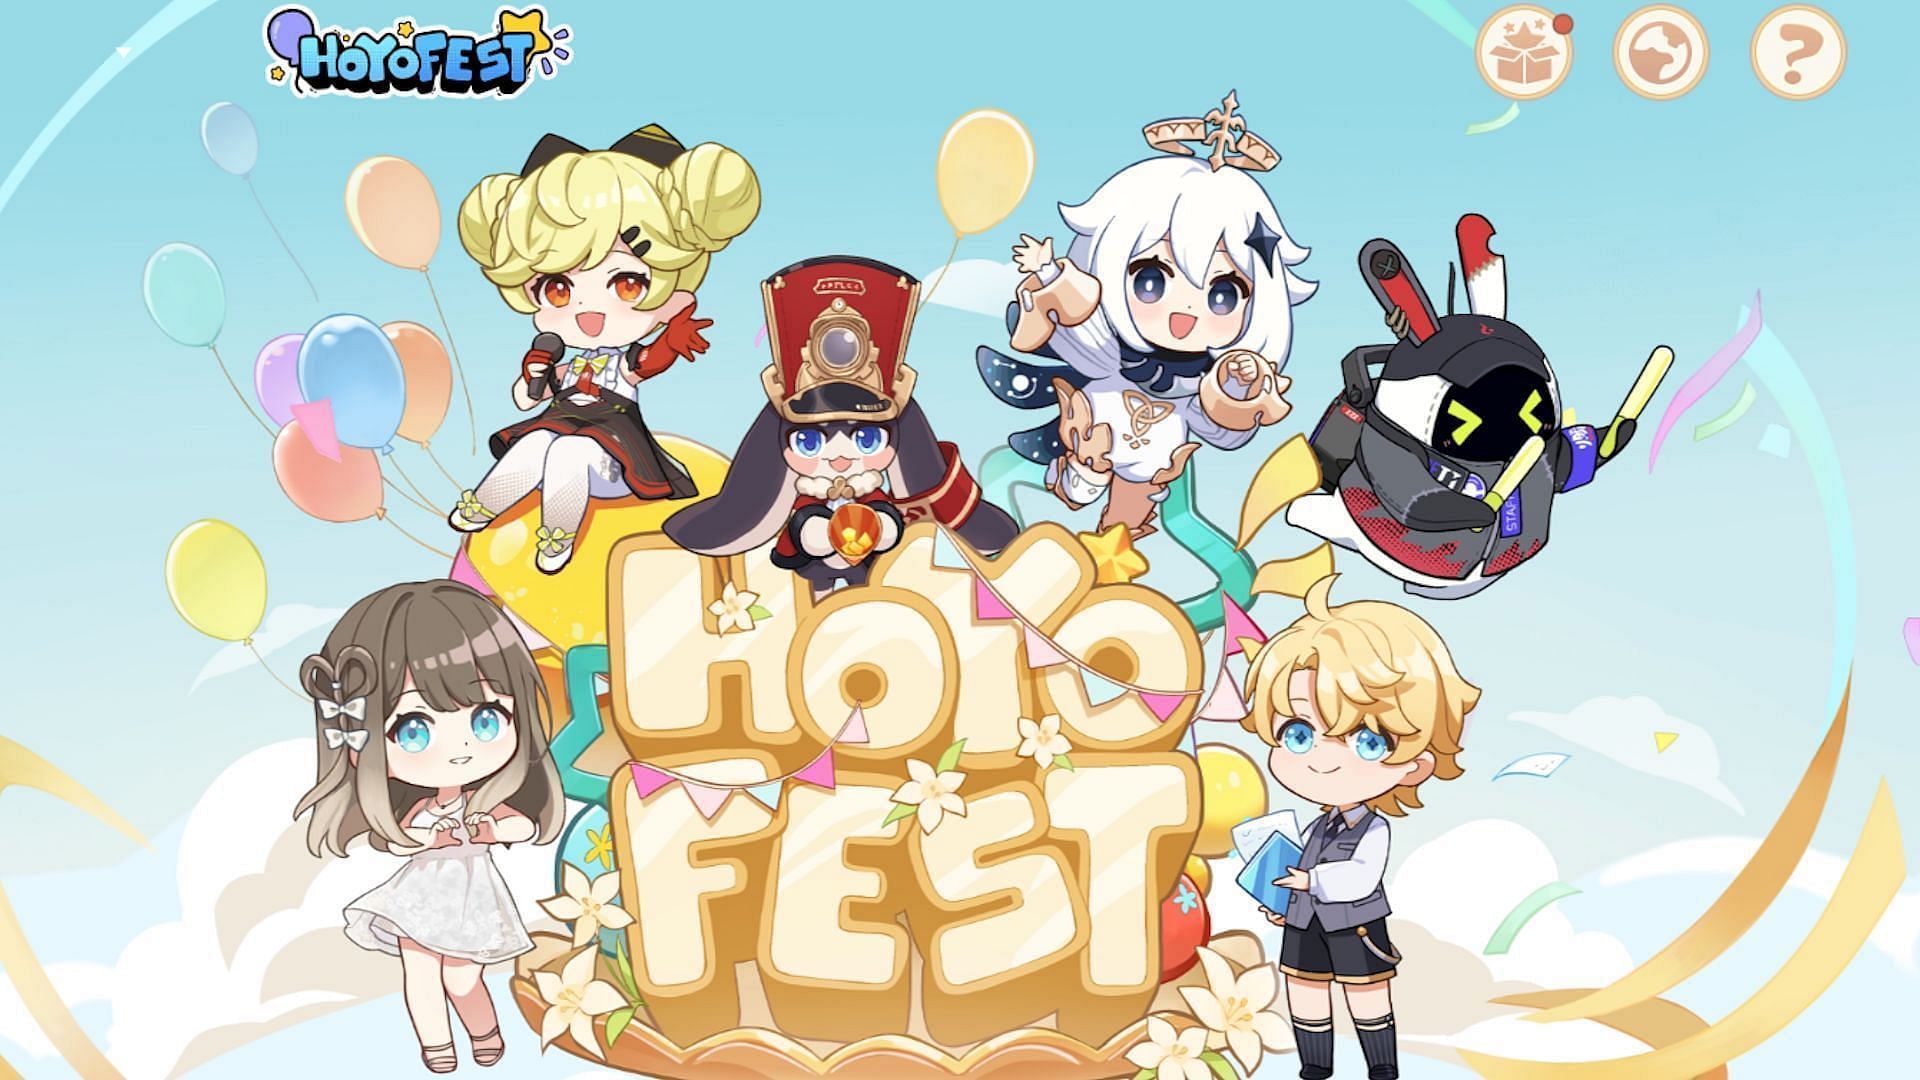 An official promotional image for this web event (Image via HoYoverse)